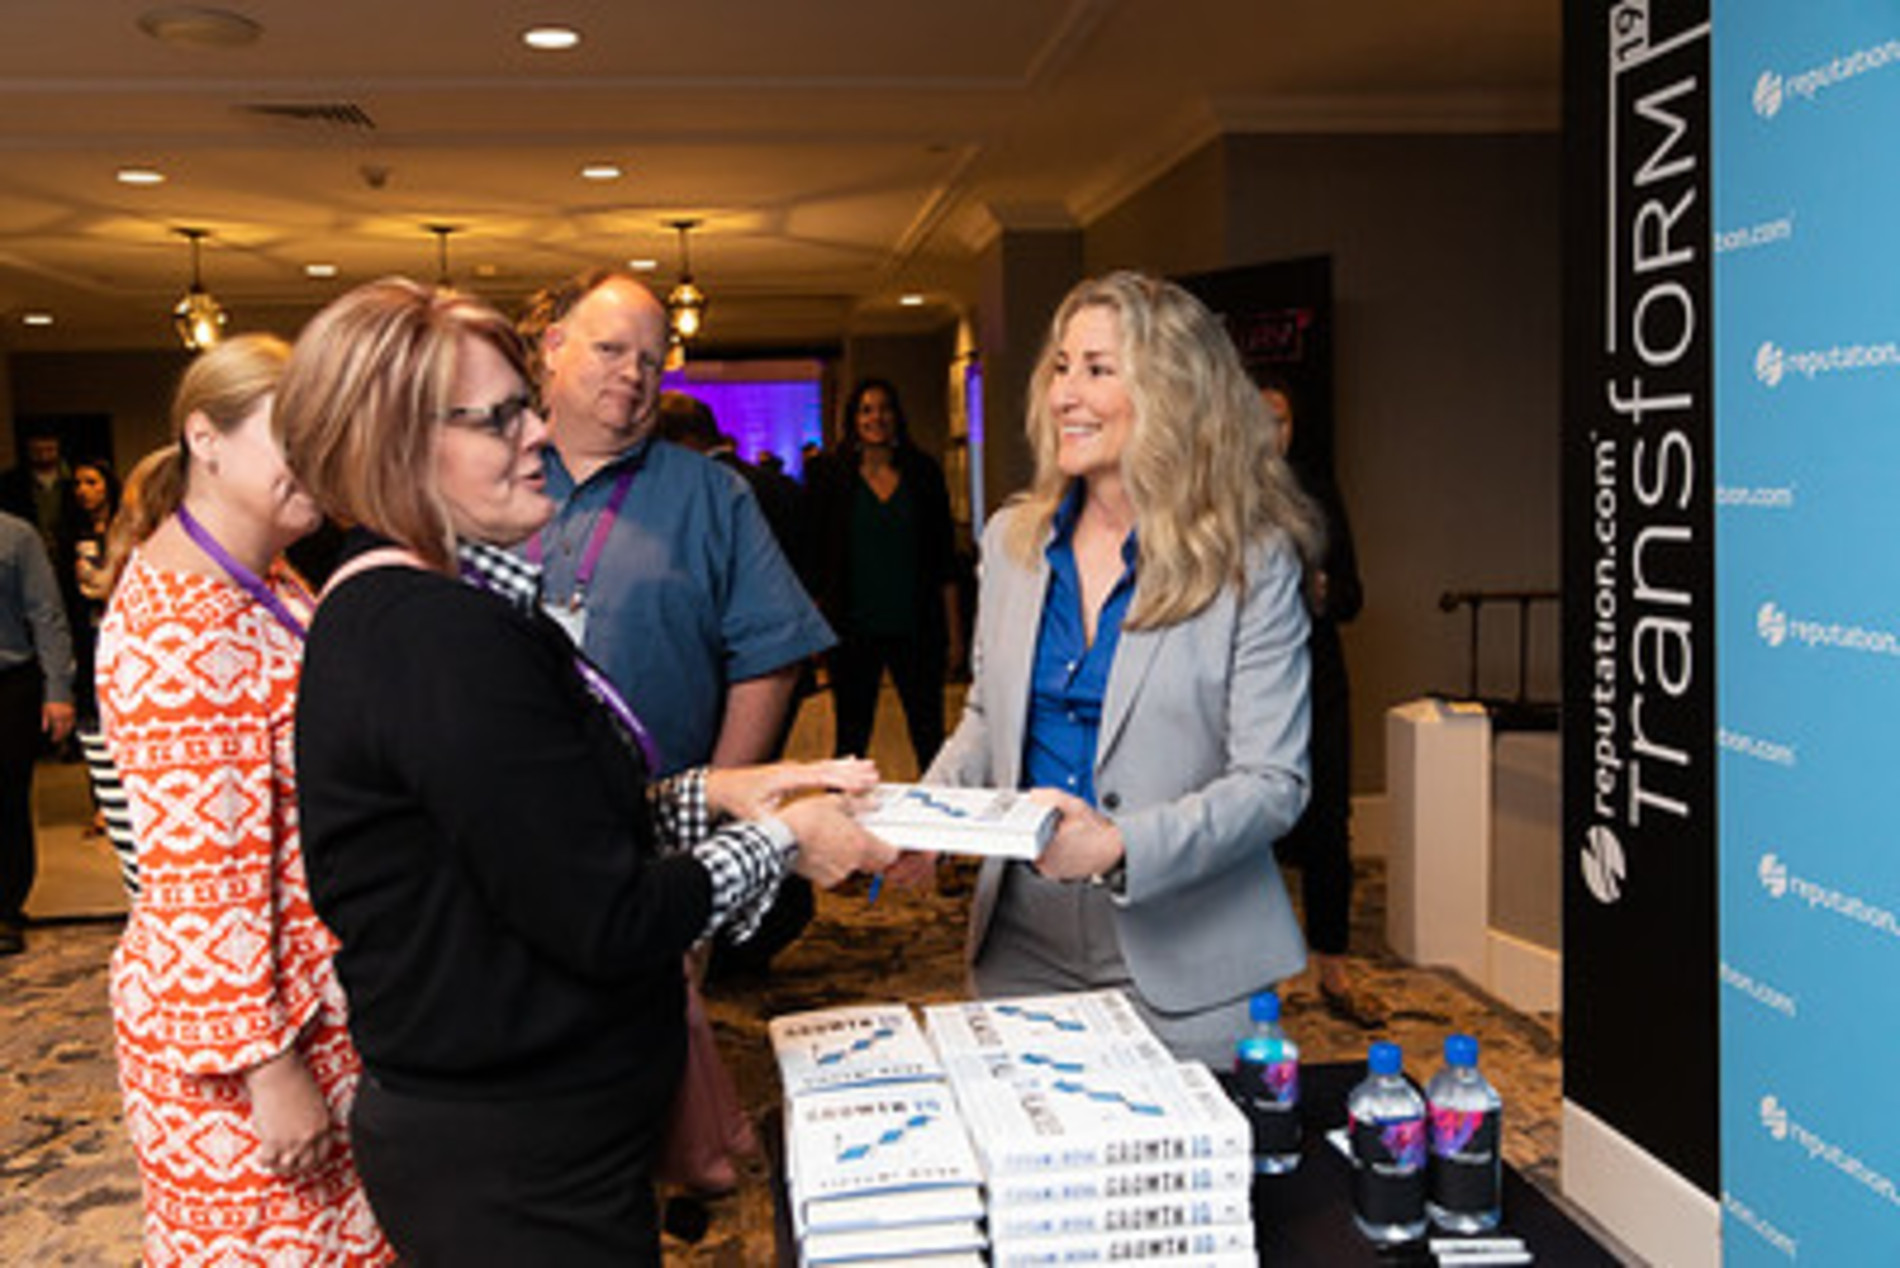 Following her keynote, Bova handed out signed copies of her best-selling book, Growth IQ.